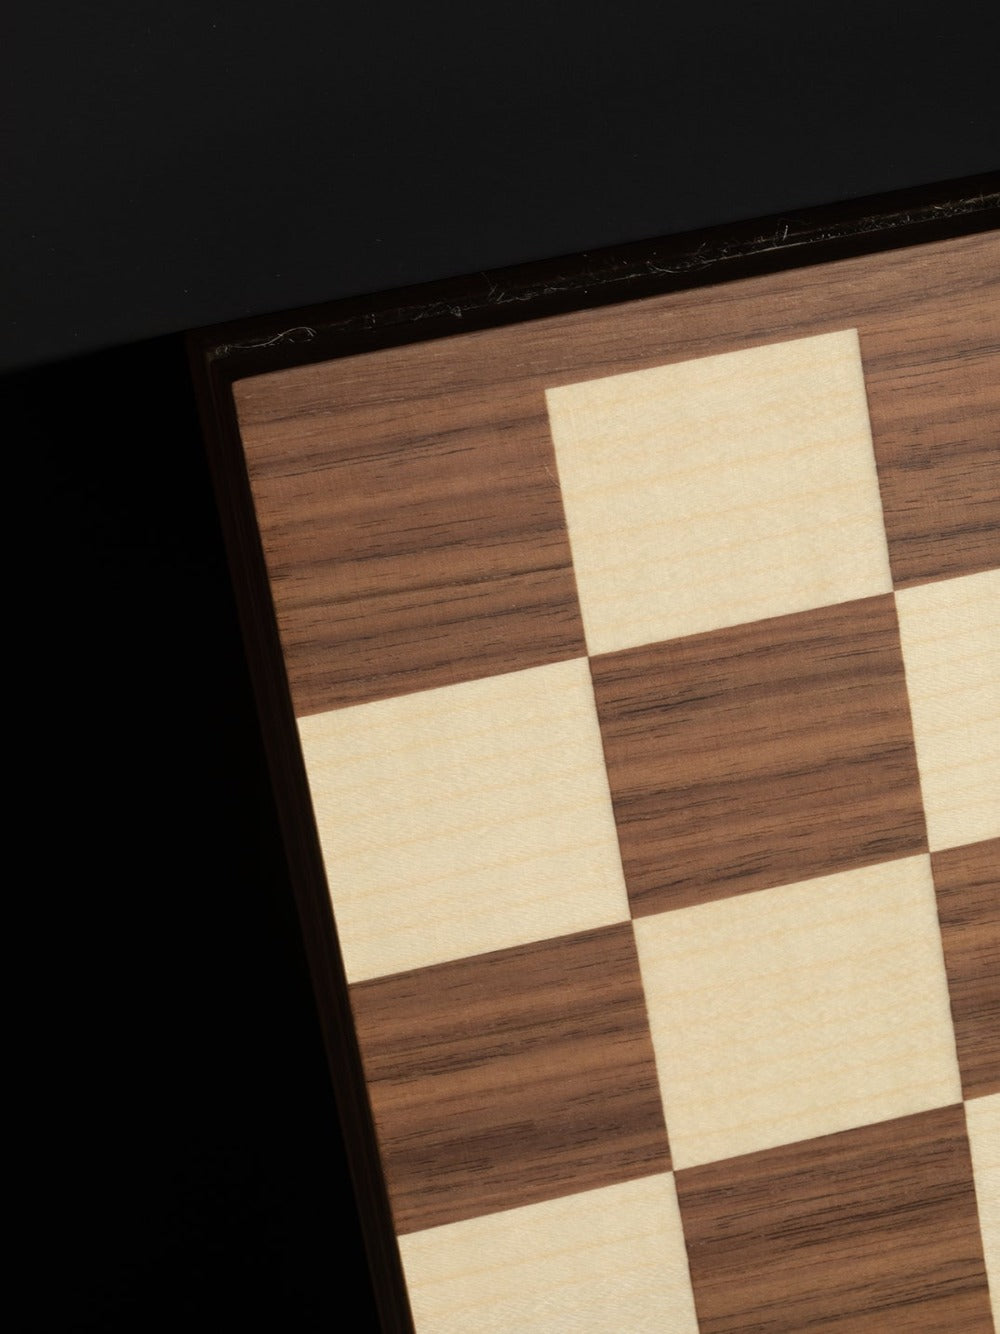 Official Folding Chess Board